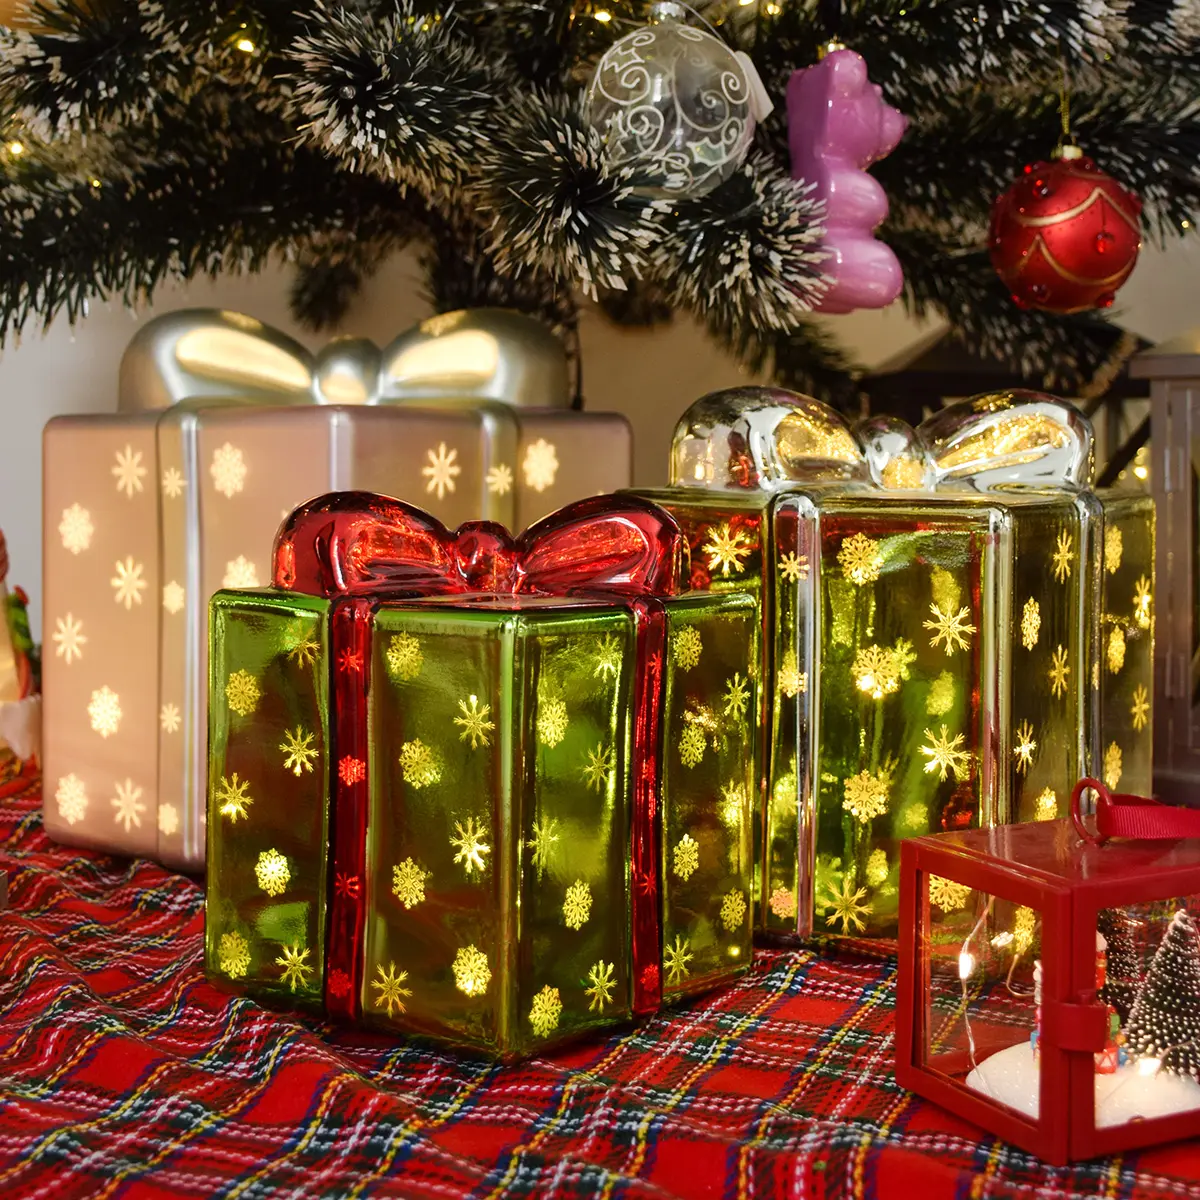 Custom made set of 3 large decorative pre lit led glass xmas Christmas presents gift boxes indoor decoration with lights